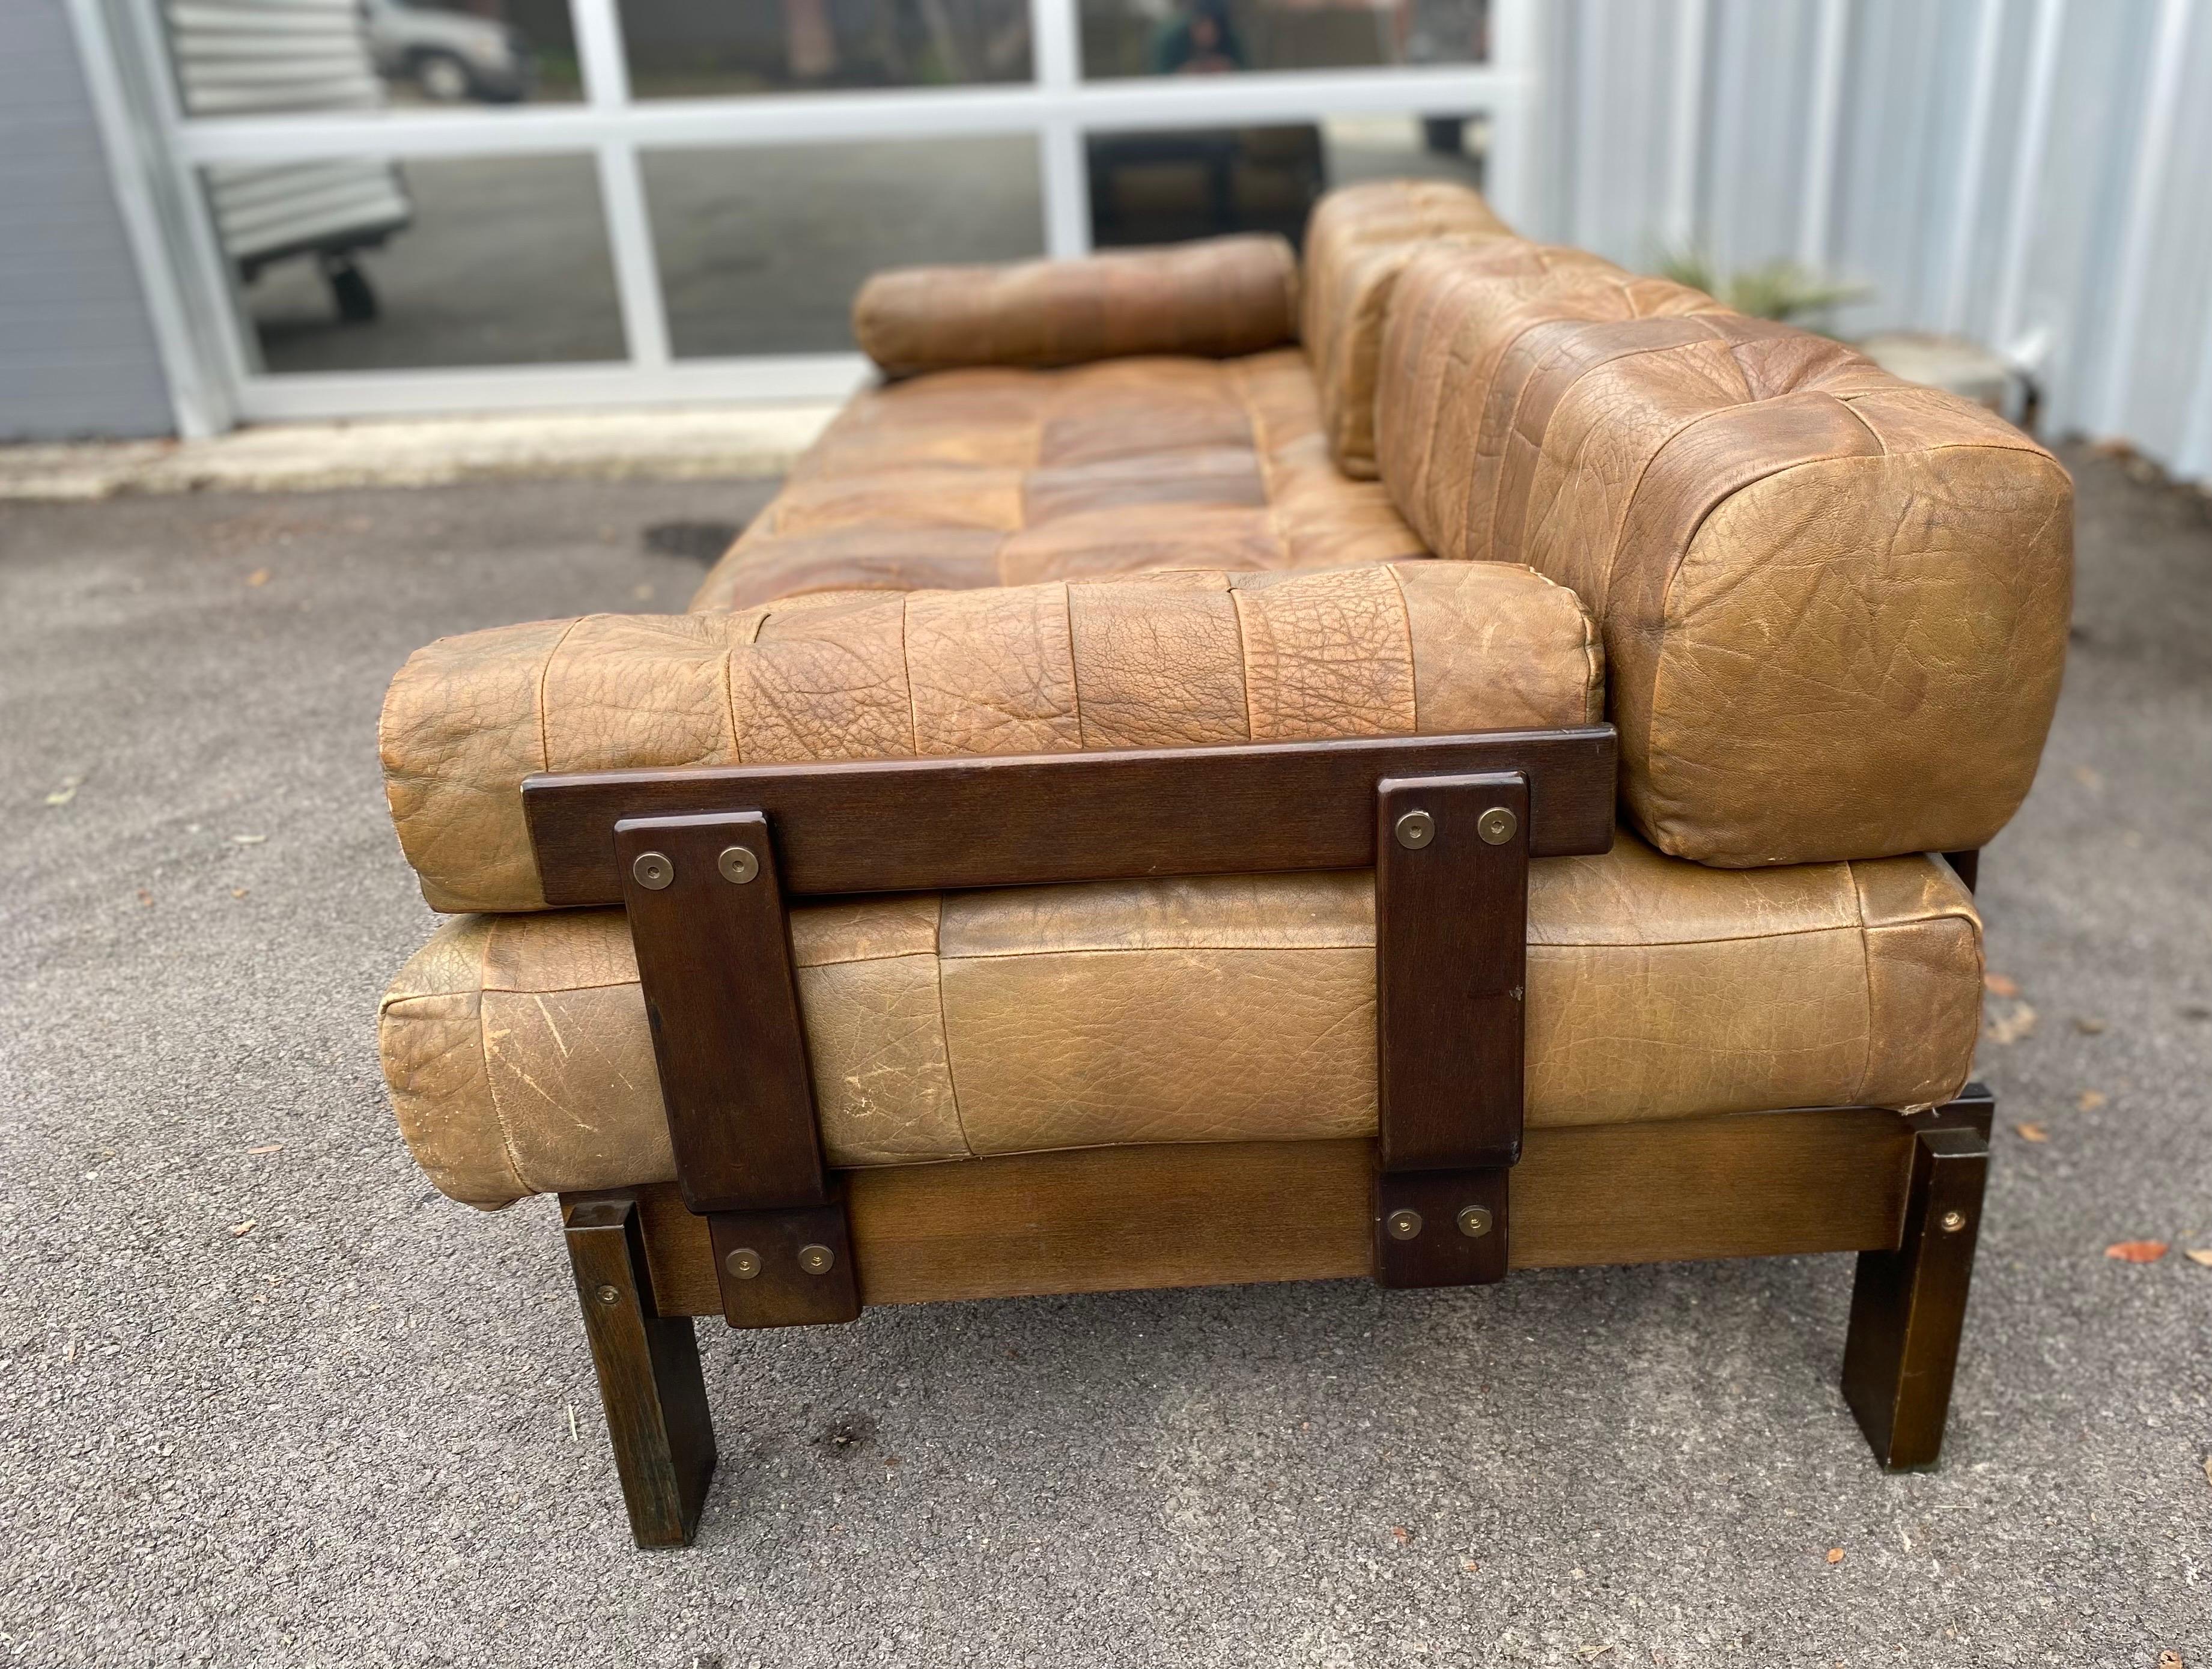 1970's wood frame couch with removable cushions